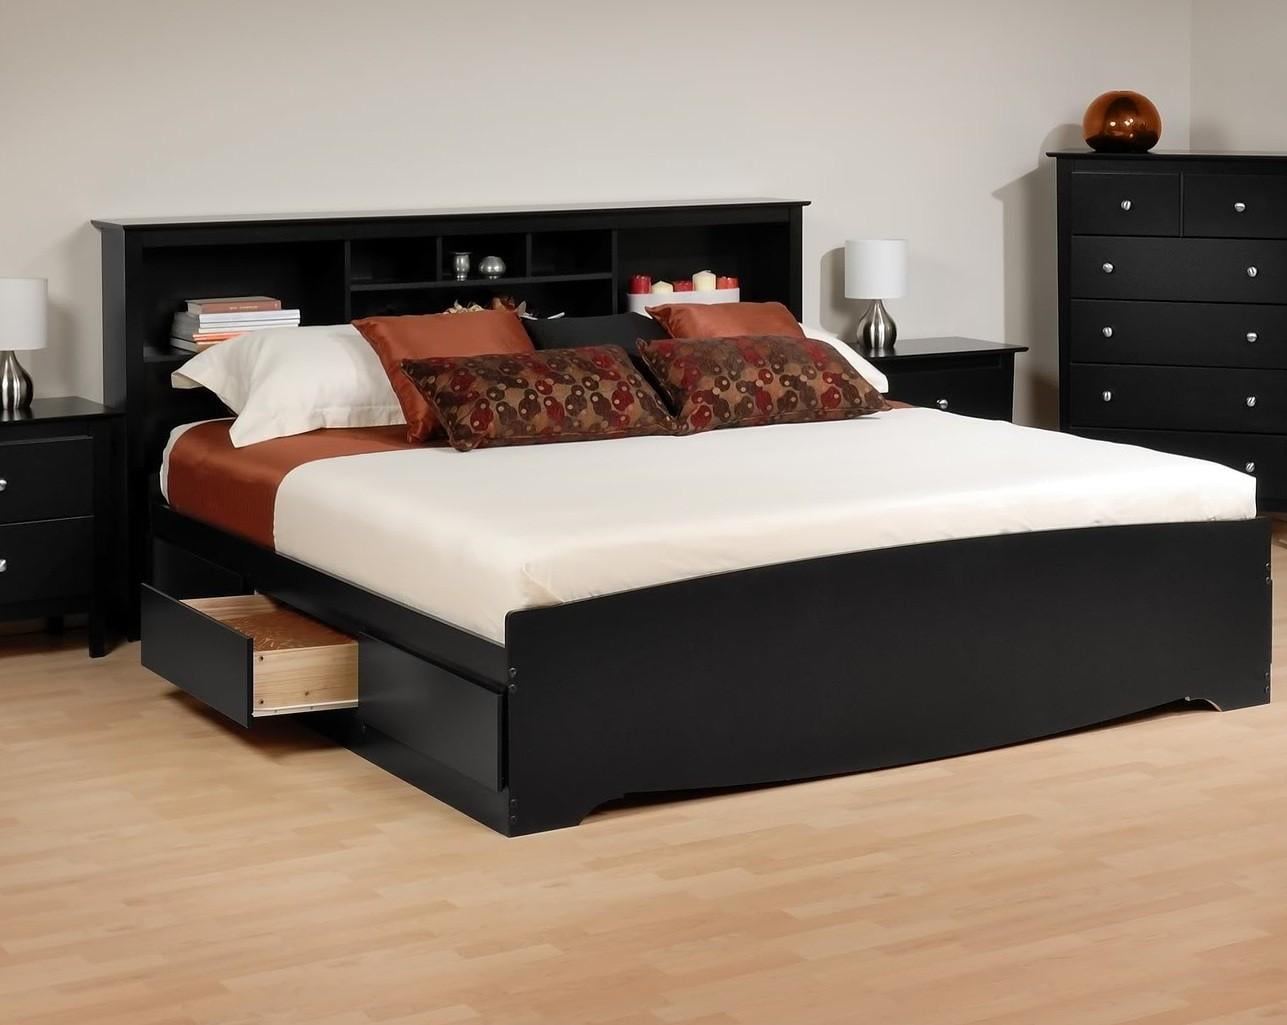 Bookcase Headboard Bed Size King, King Single Bed With Bookcase Bedhead